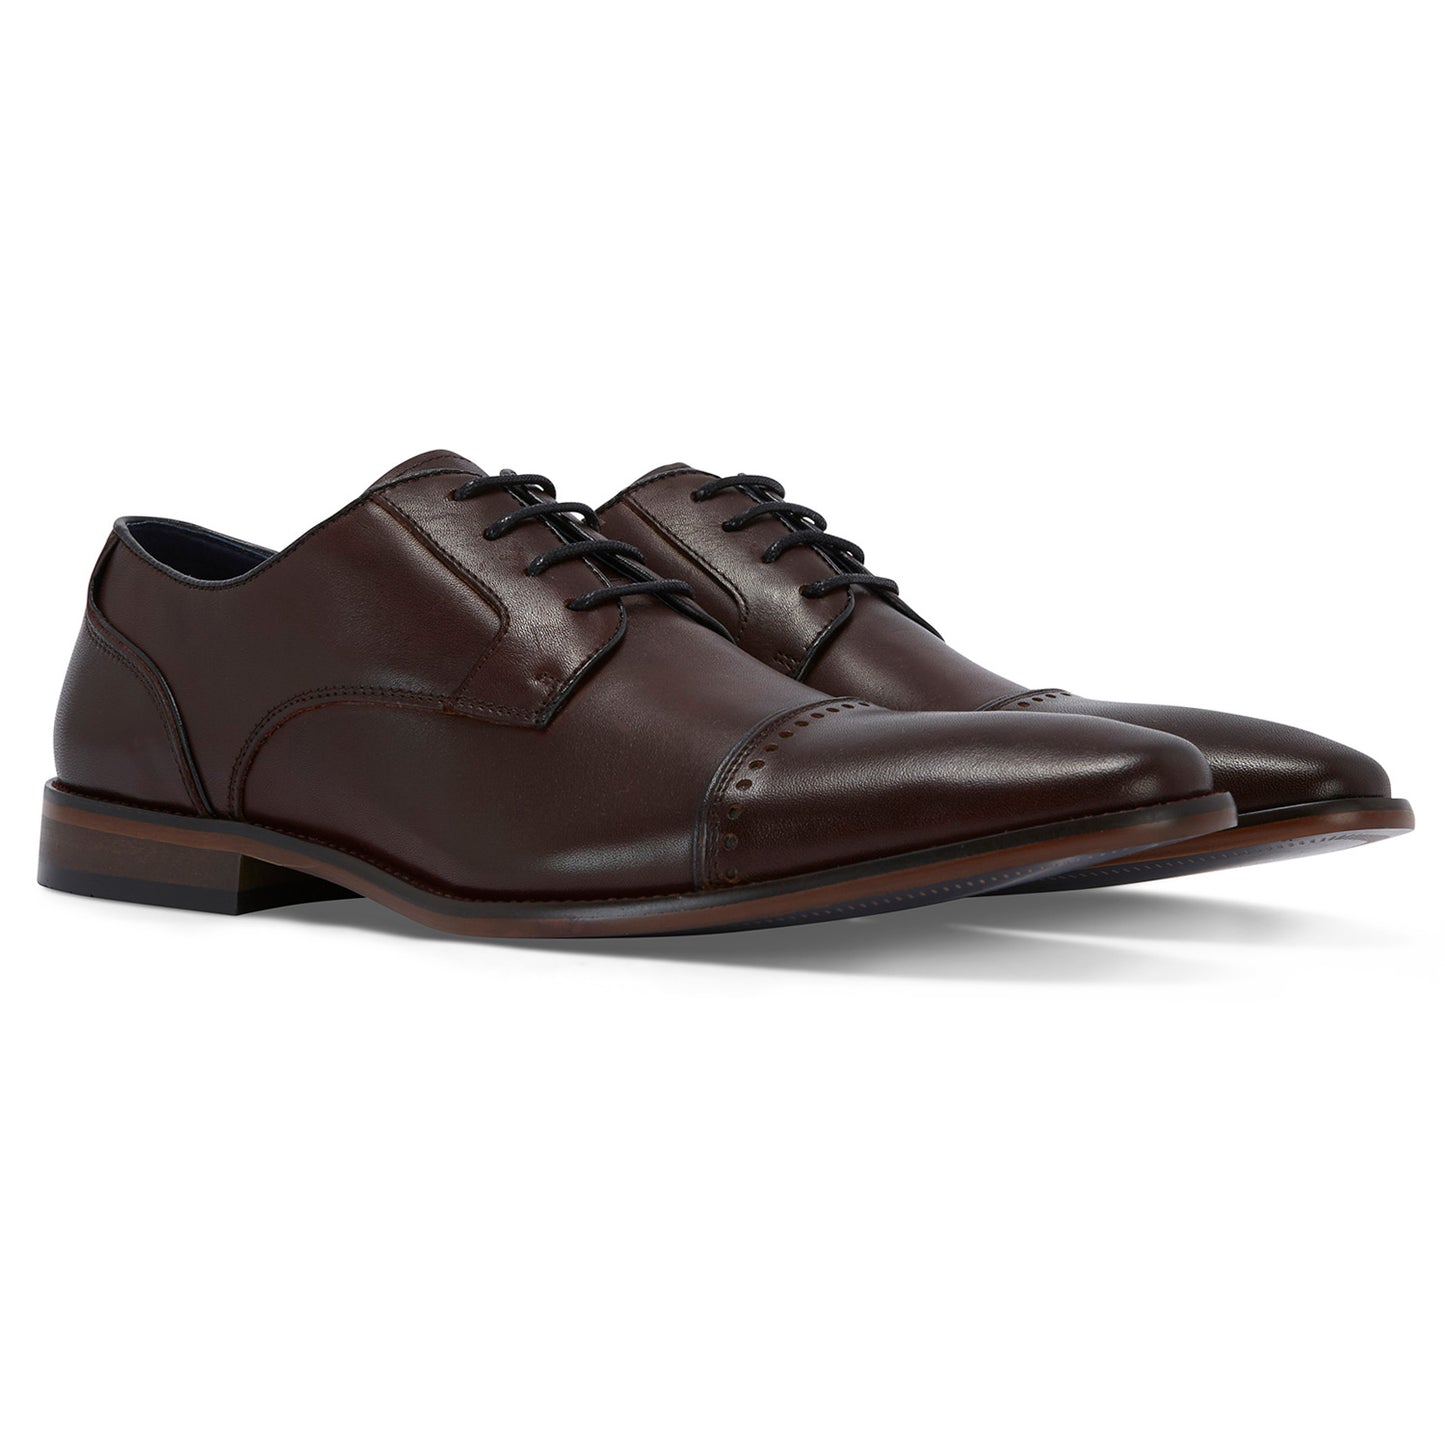 Remus Uomo 02158 Burgundy Leather Derby Shoes